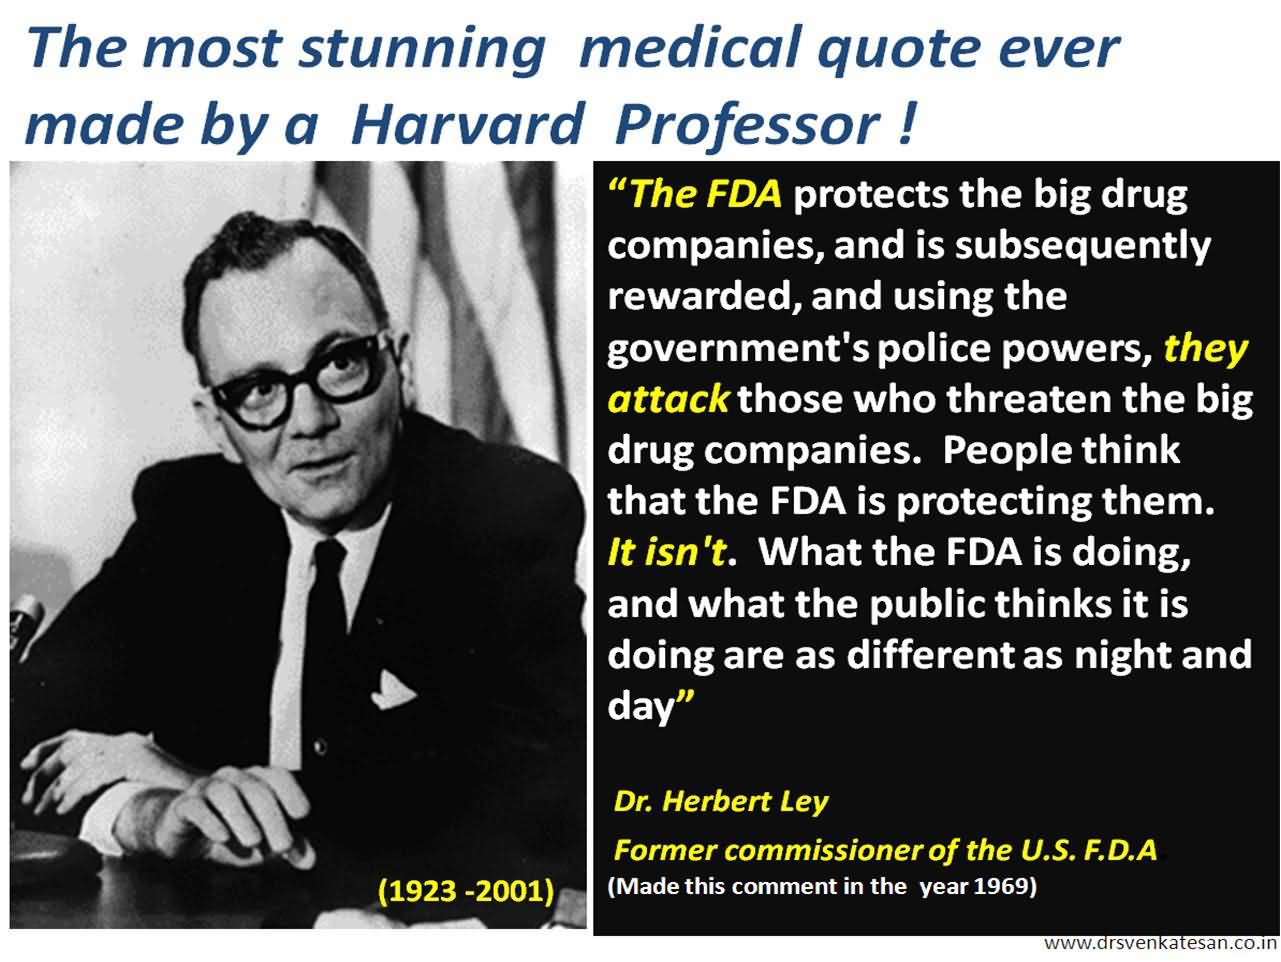 The FDA 'protects' the big drug companies and are subsequently rewarded, and using the government's police powers they attack those who ... Dr. herbert Ley